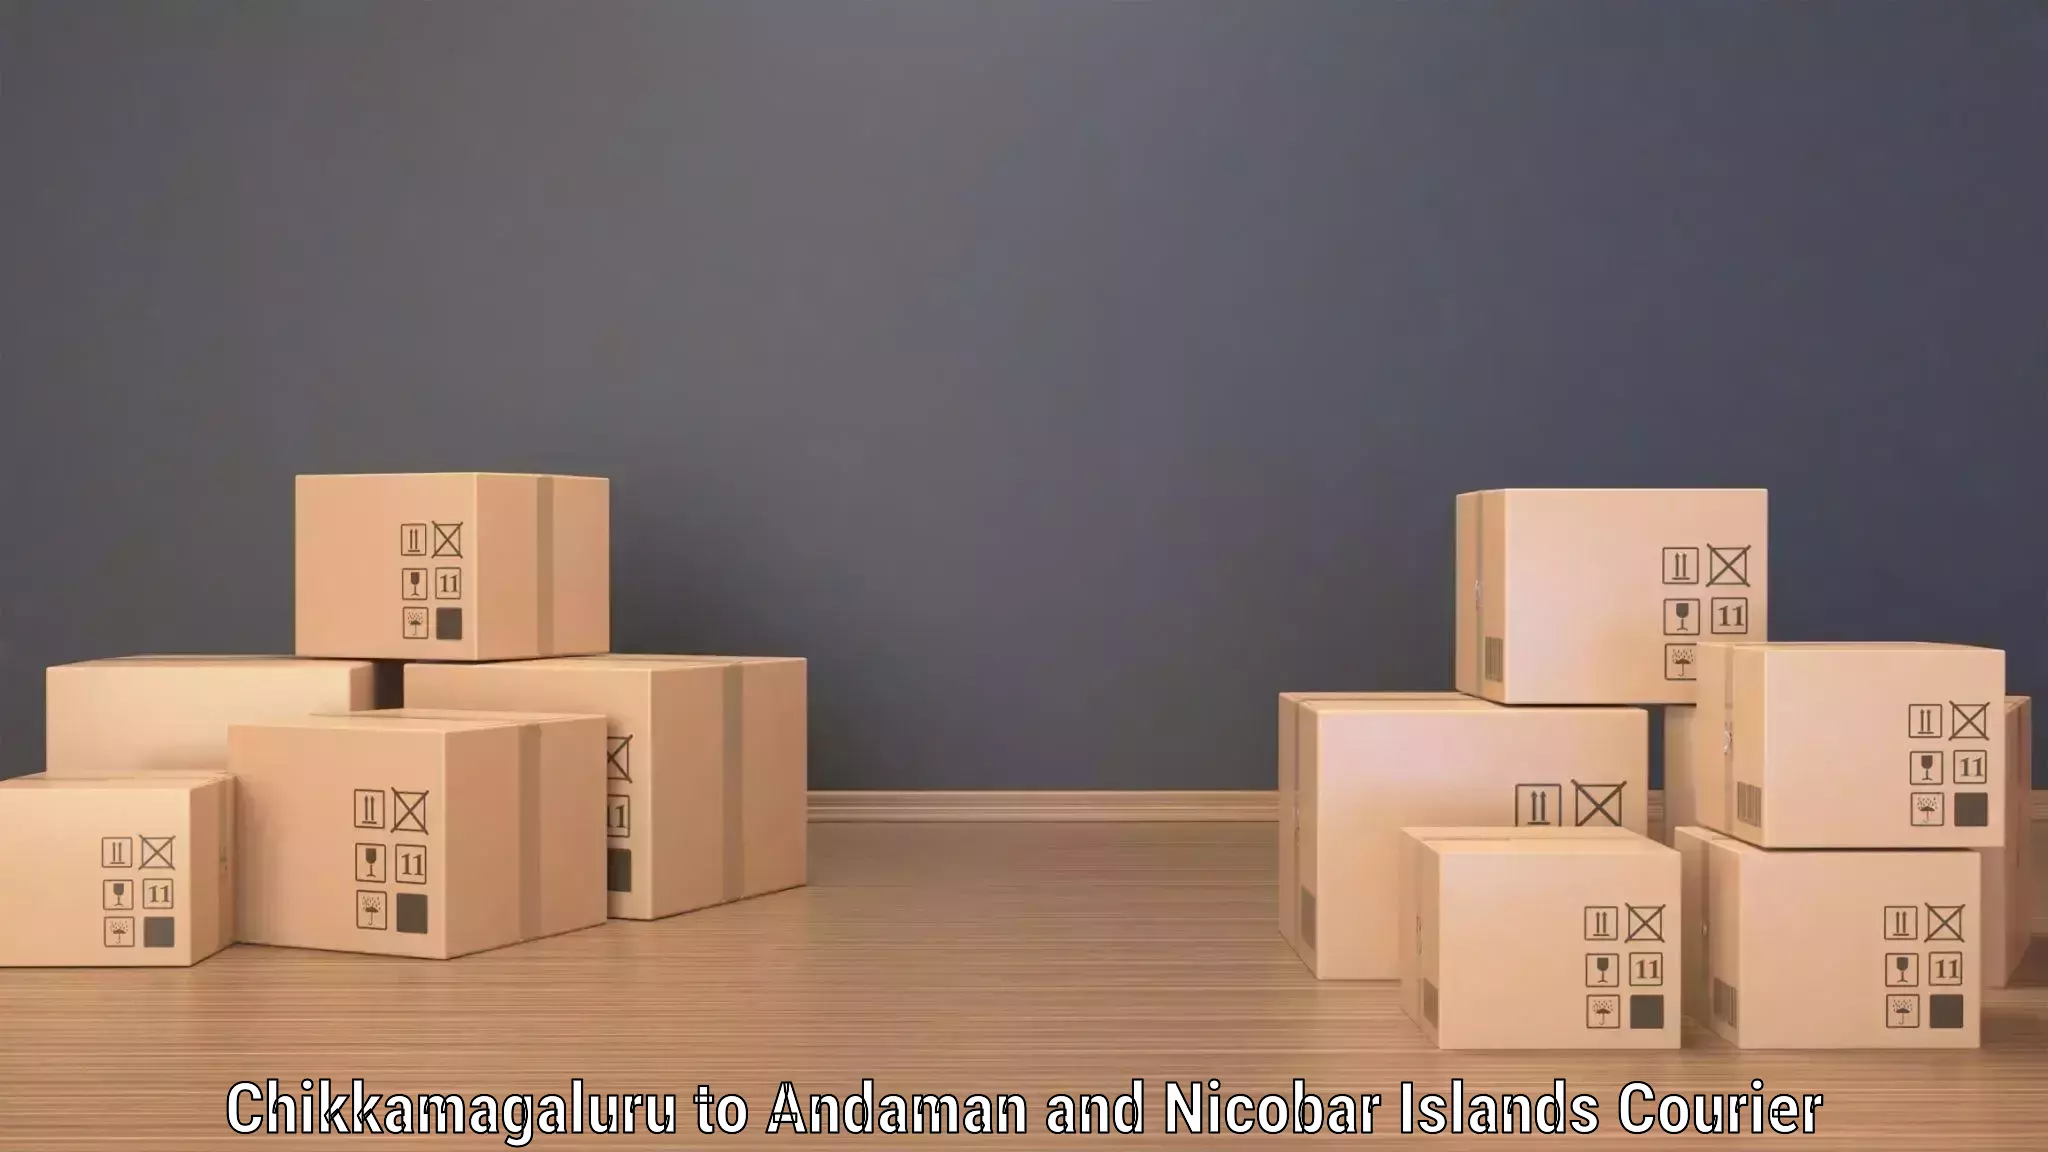 Express package delivery in Chikkamagaluru to Andaman and Nicobar Islands